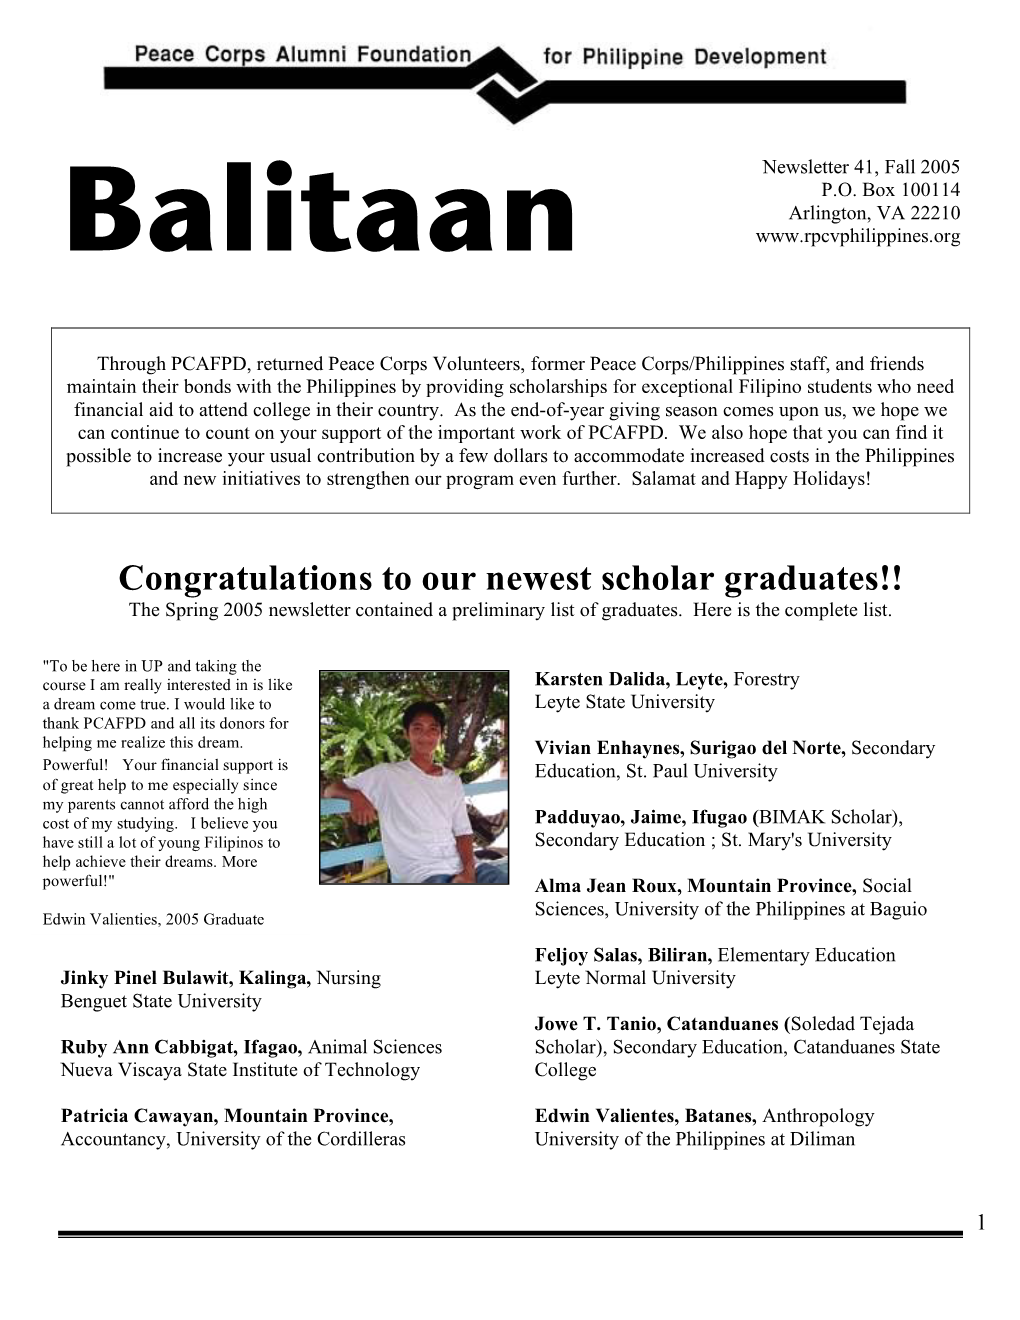 Congratulations to Our Newest Scholar Graduates!! the Spring 2005 Newsletter Contained a Preliminary List of Graduates